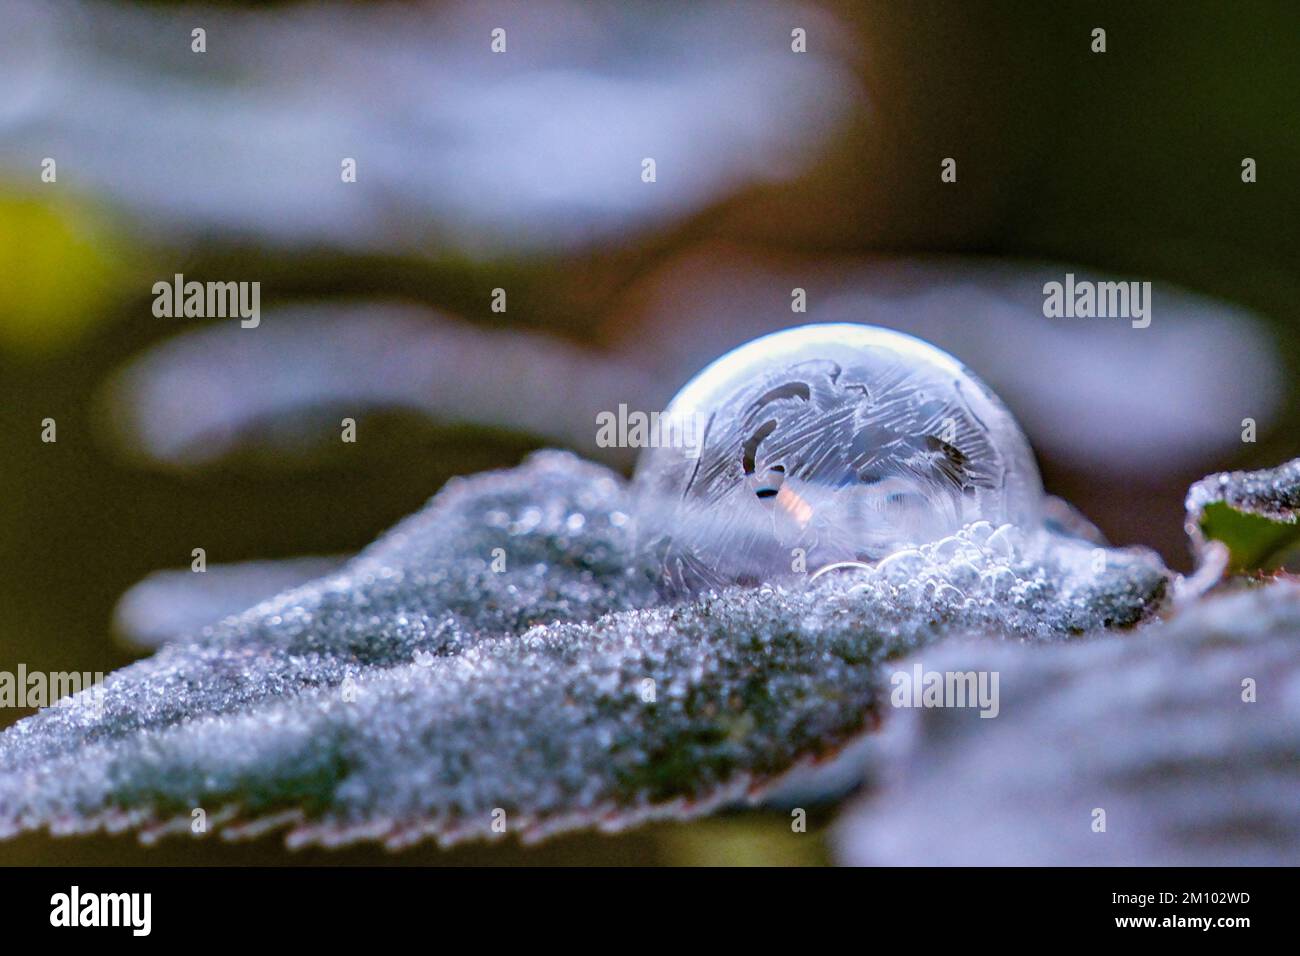 Wadebridge, Cornwall, UK. 9th December 2022. UK Weather. Another cold and frosty start to the day on the North Cornwall coast.  An ice bubble covered with frosty patterns freezes over on top of a rose leaf. Credit Simon Maycock / Alamy Live News. Stock Photo